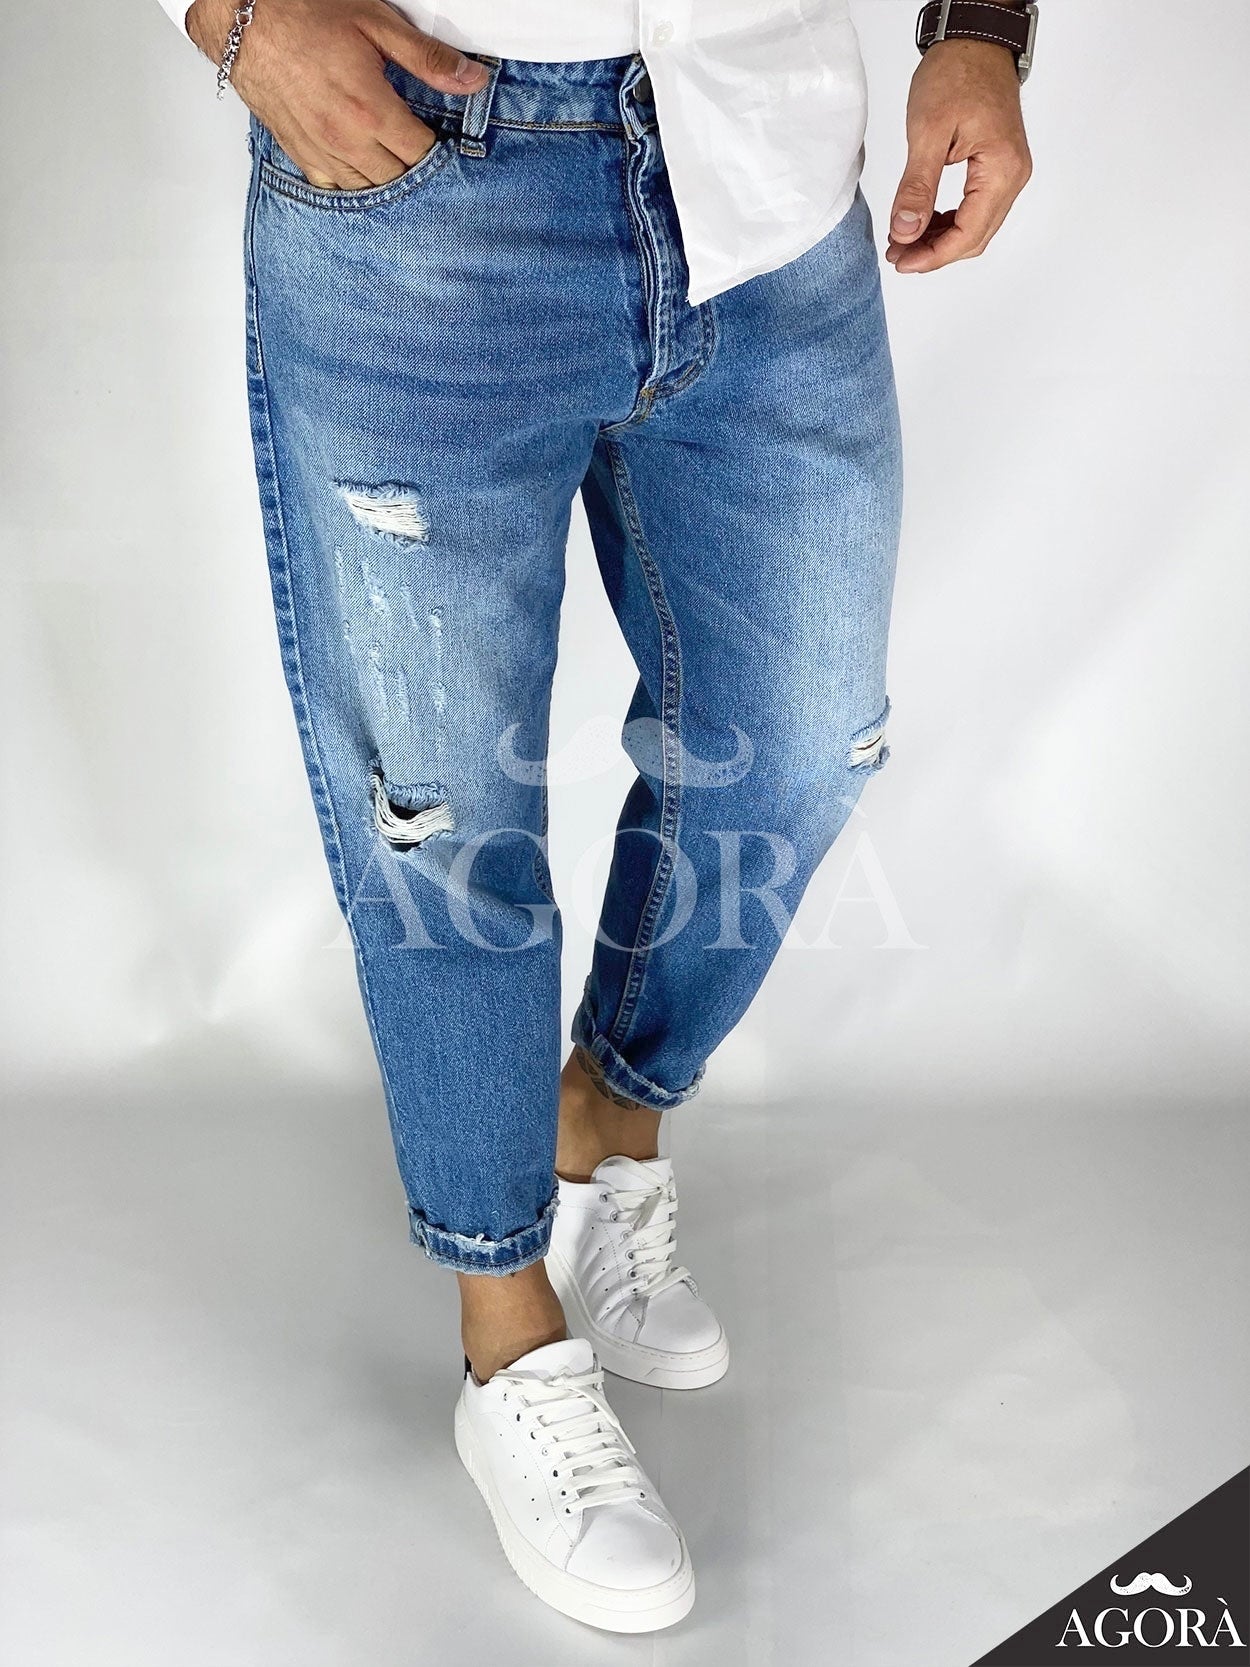 Jeans loose fit MAIORCASE132